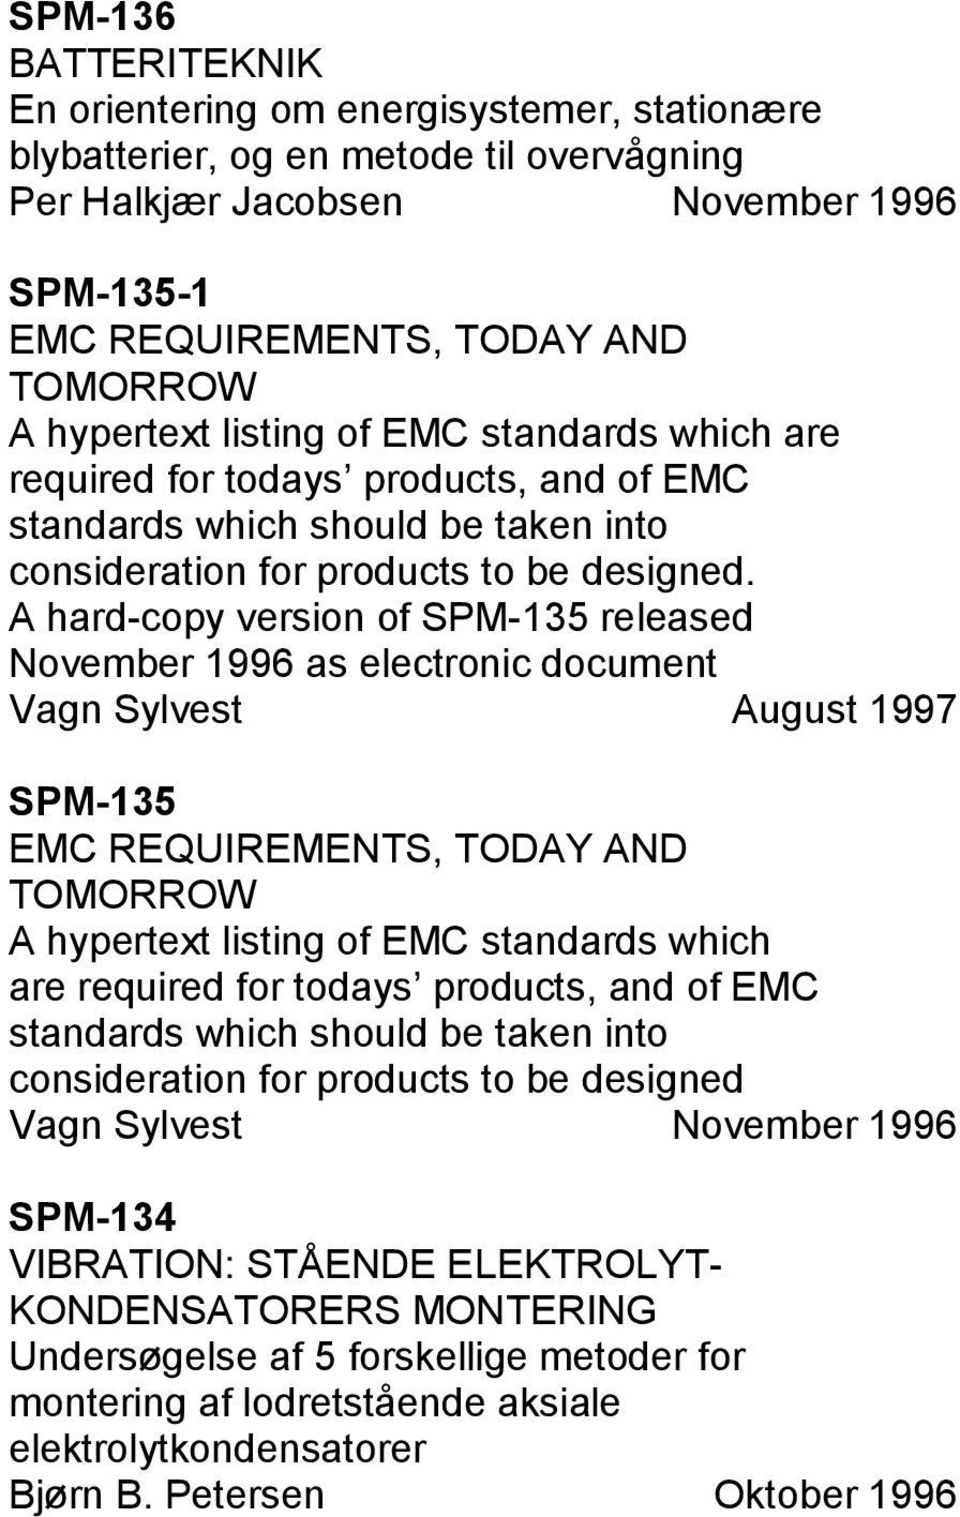 A hard-copy version of SPM-135 released November 1996 as electronic document Vagn Sylvest August 1997 SPM-135 EMC REQUIREMENTS, TODAY AND TOMORROW A hypertext listing of EMC standards which are